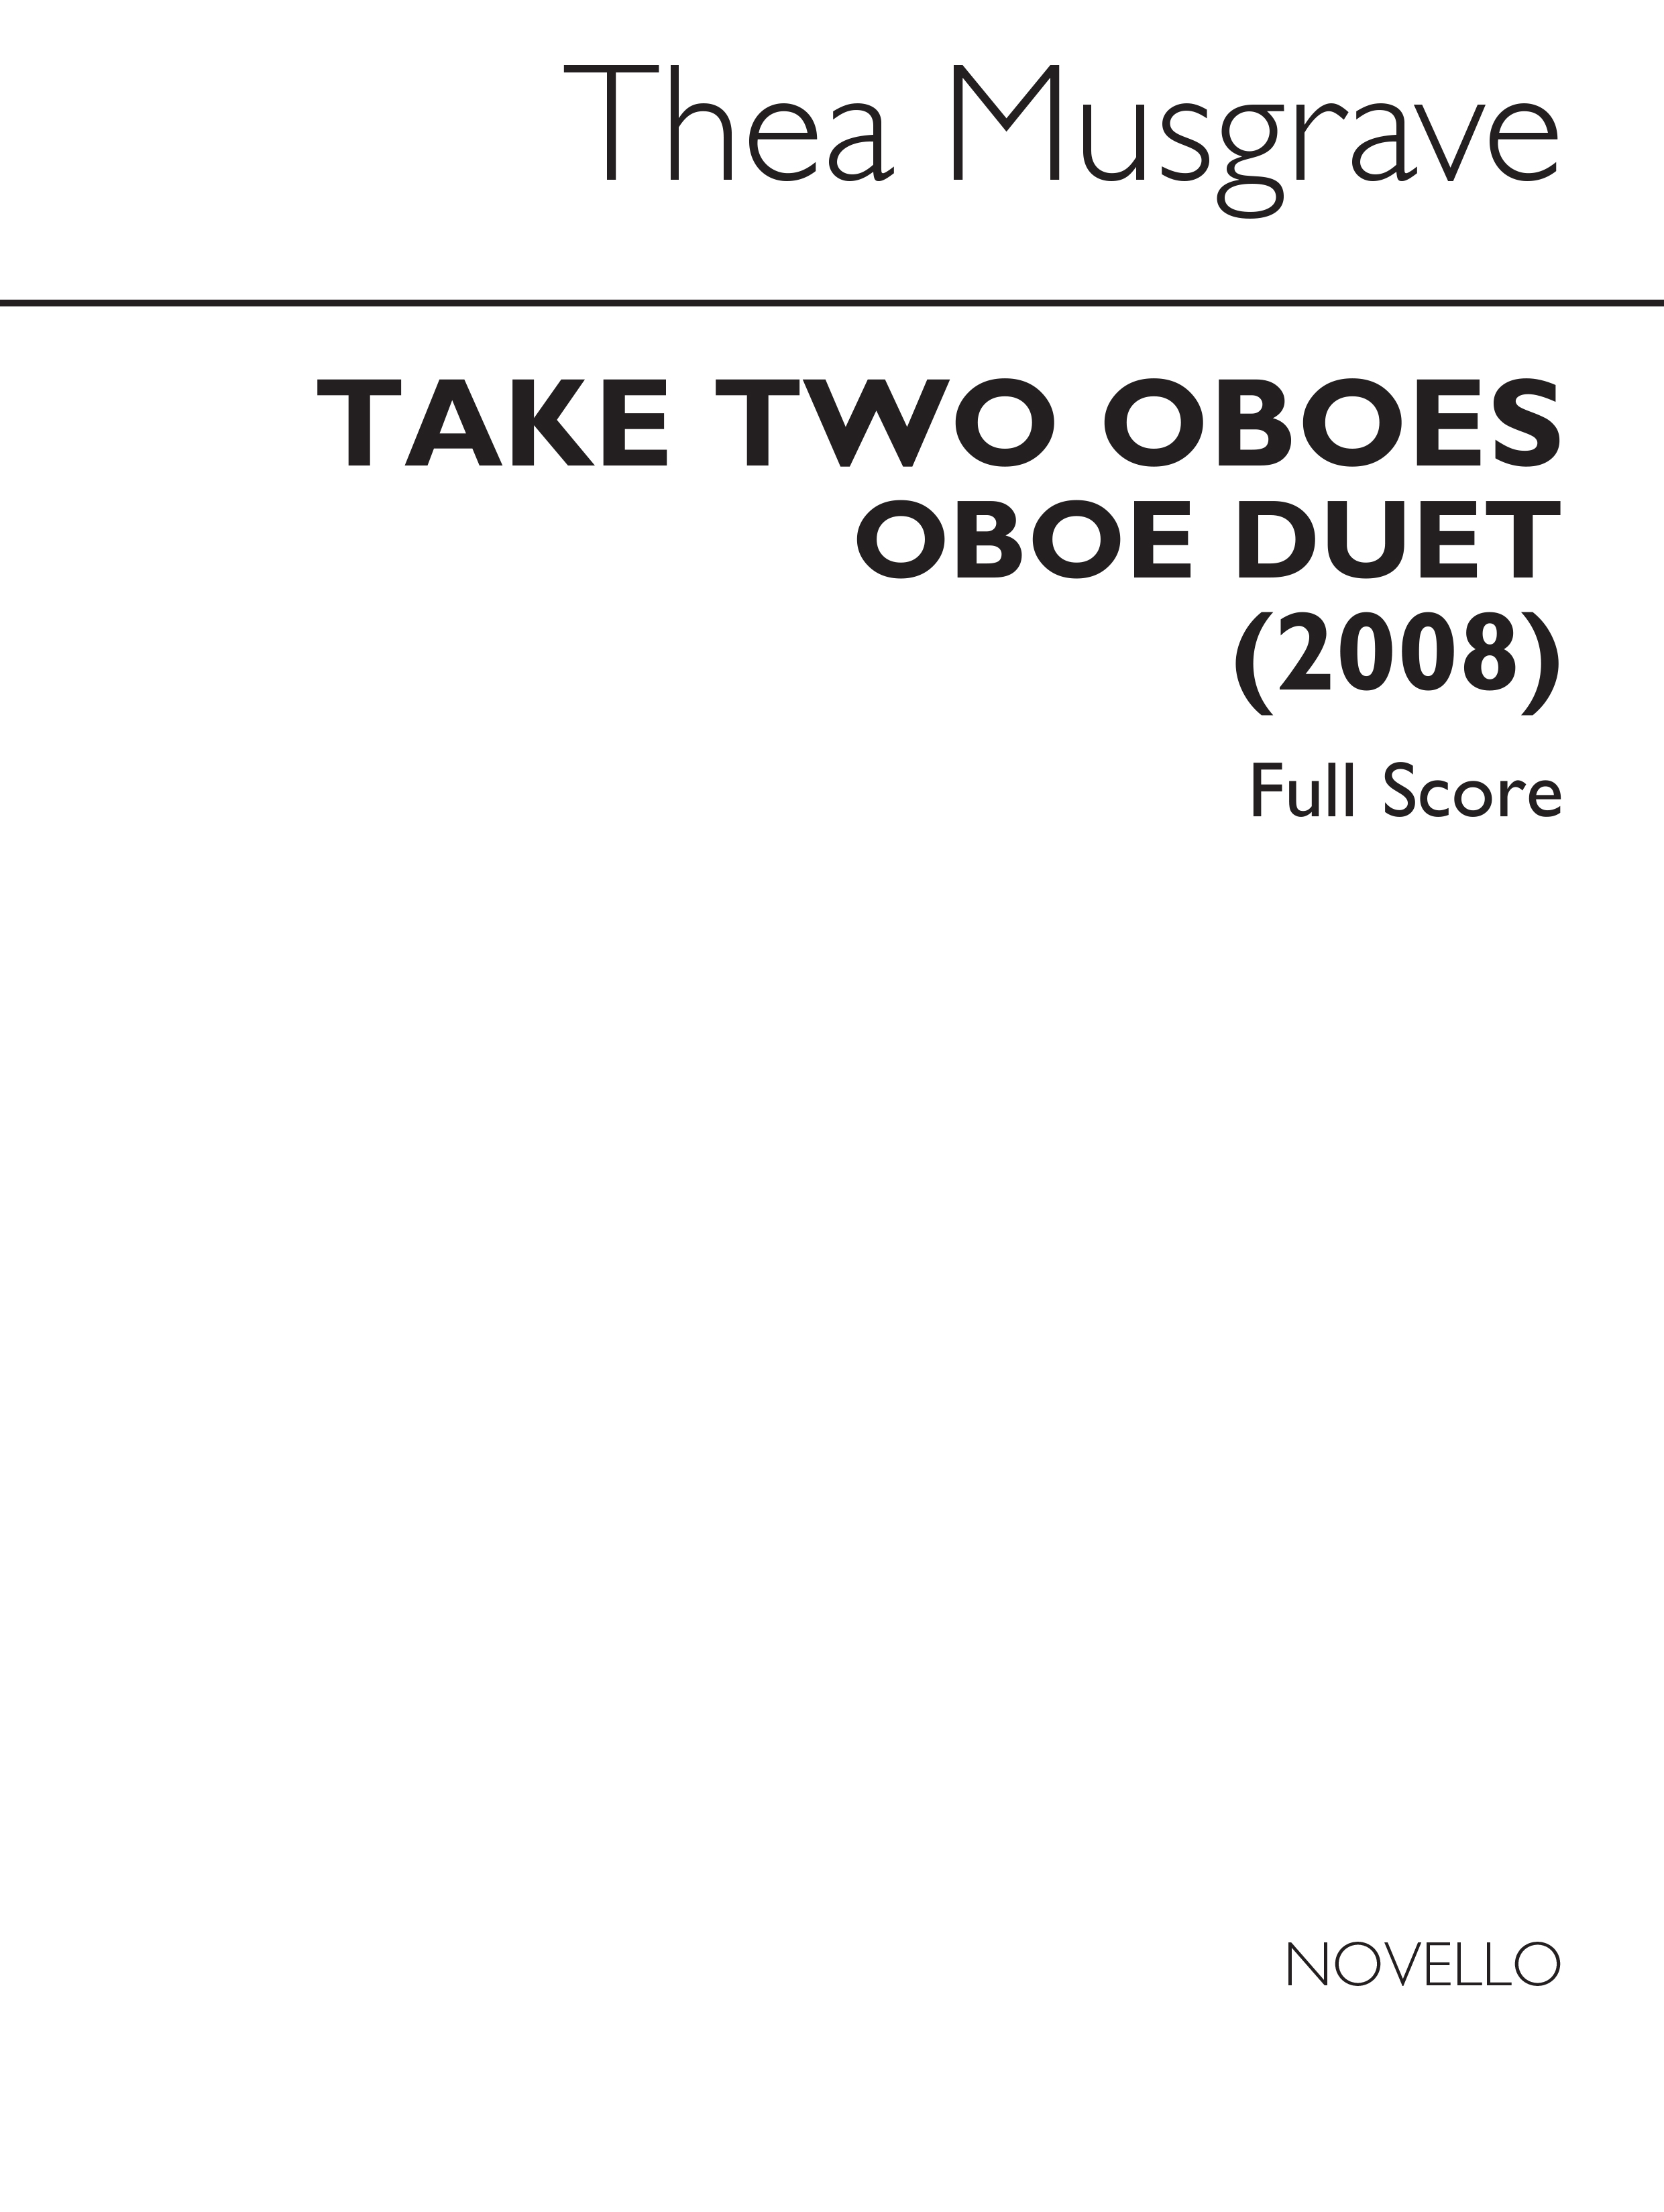 Thea Musgrave: Take Two Oboes (Oboe Duet): Oboe Duet: Score